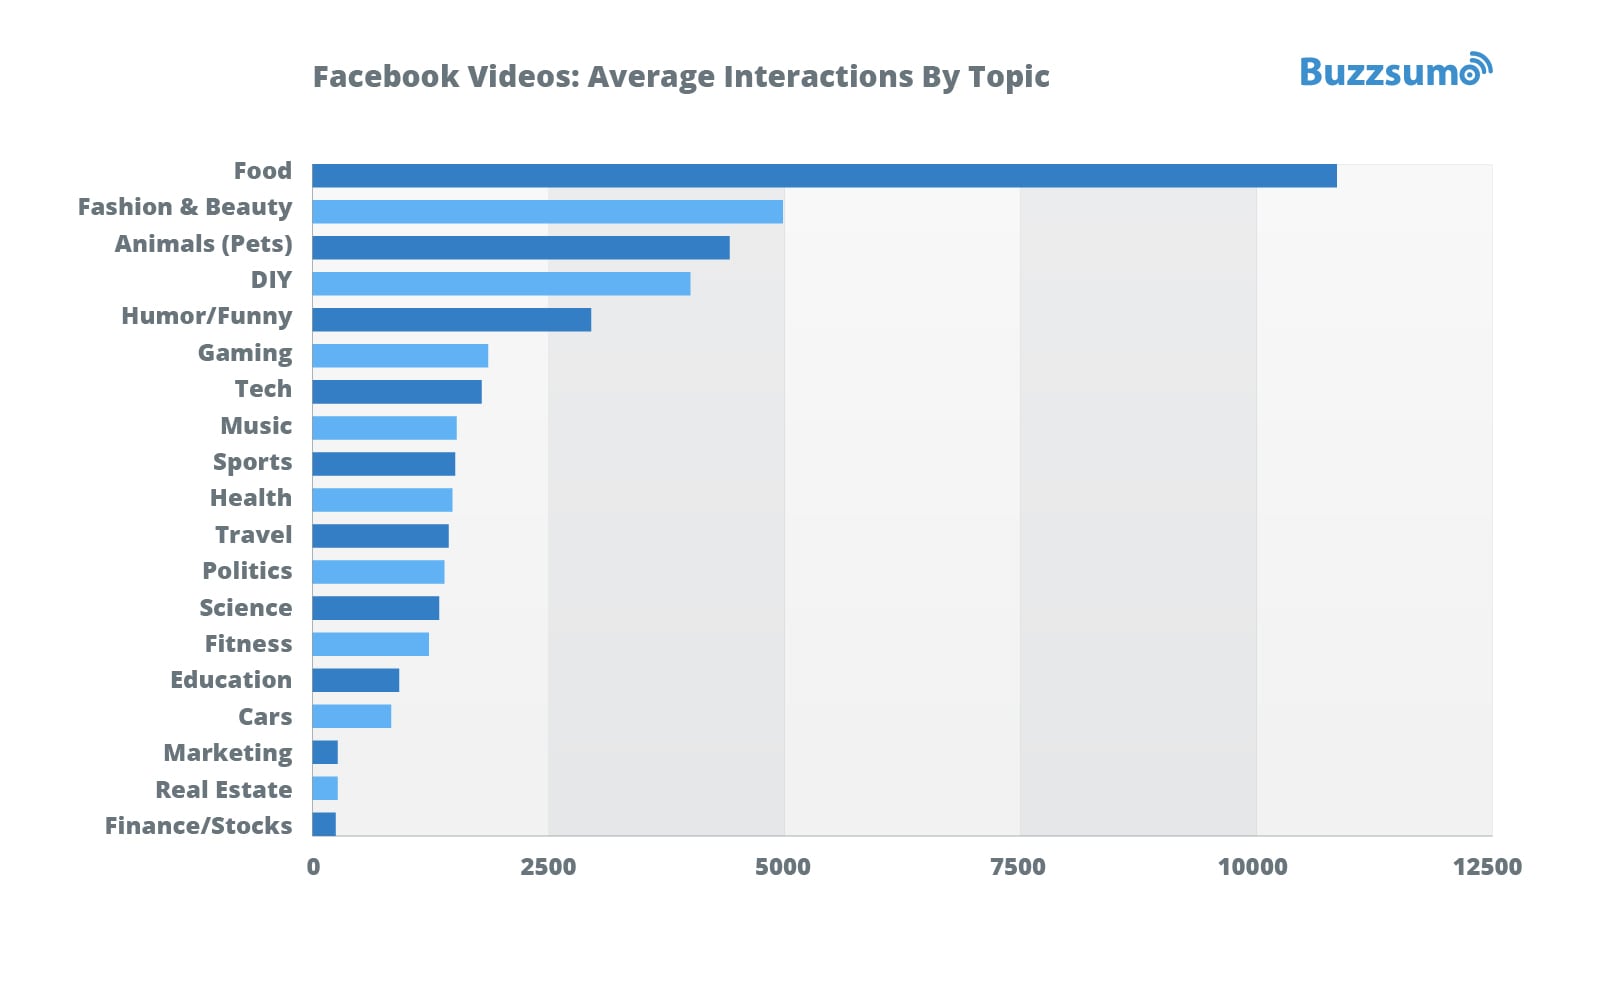 Top Video Content on Facebook